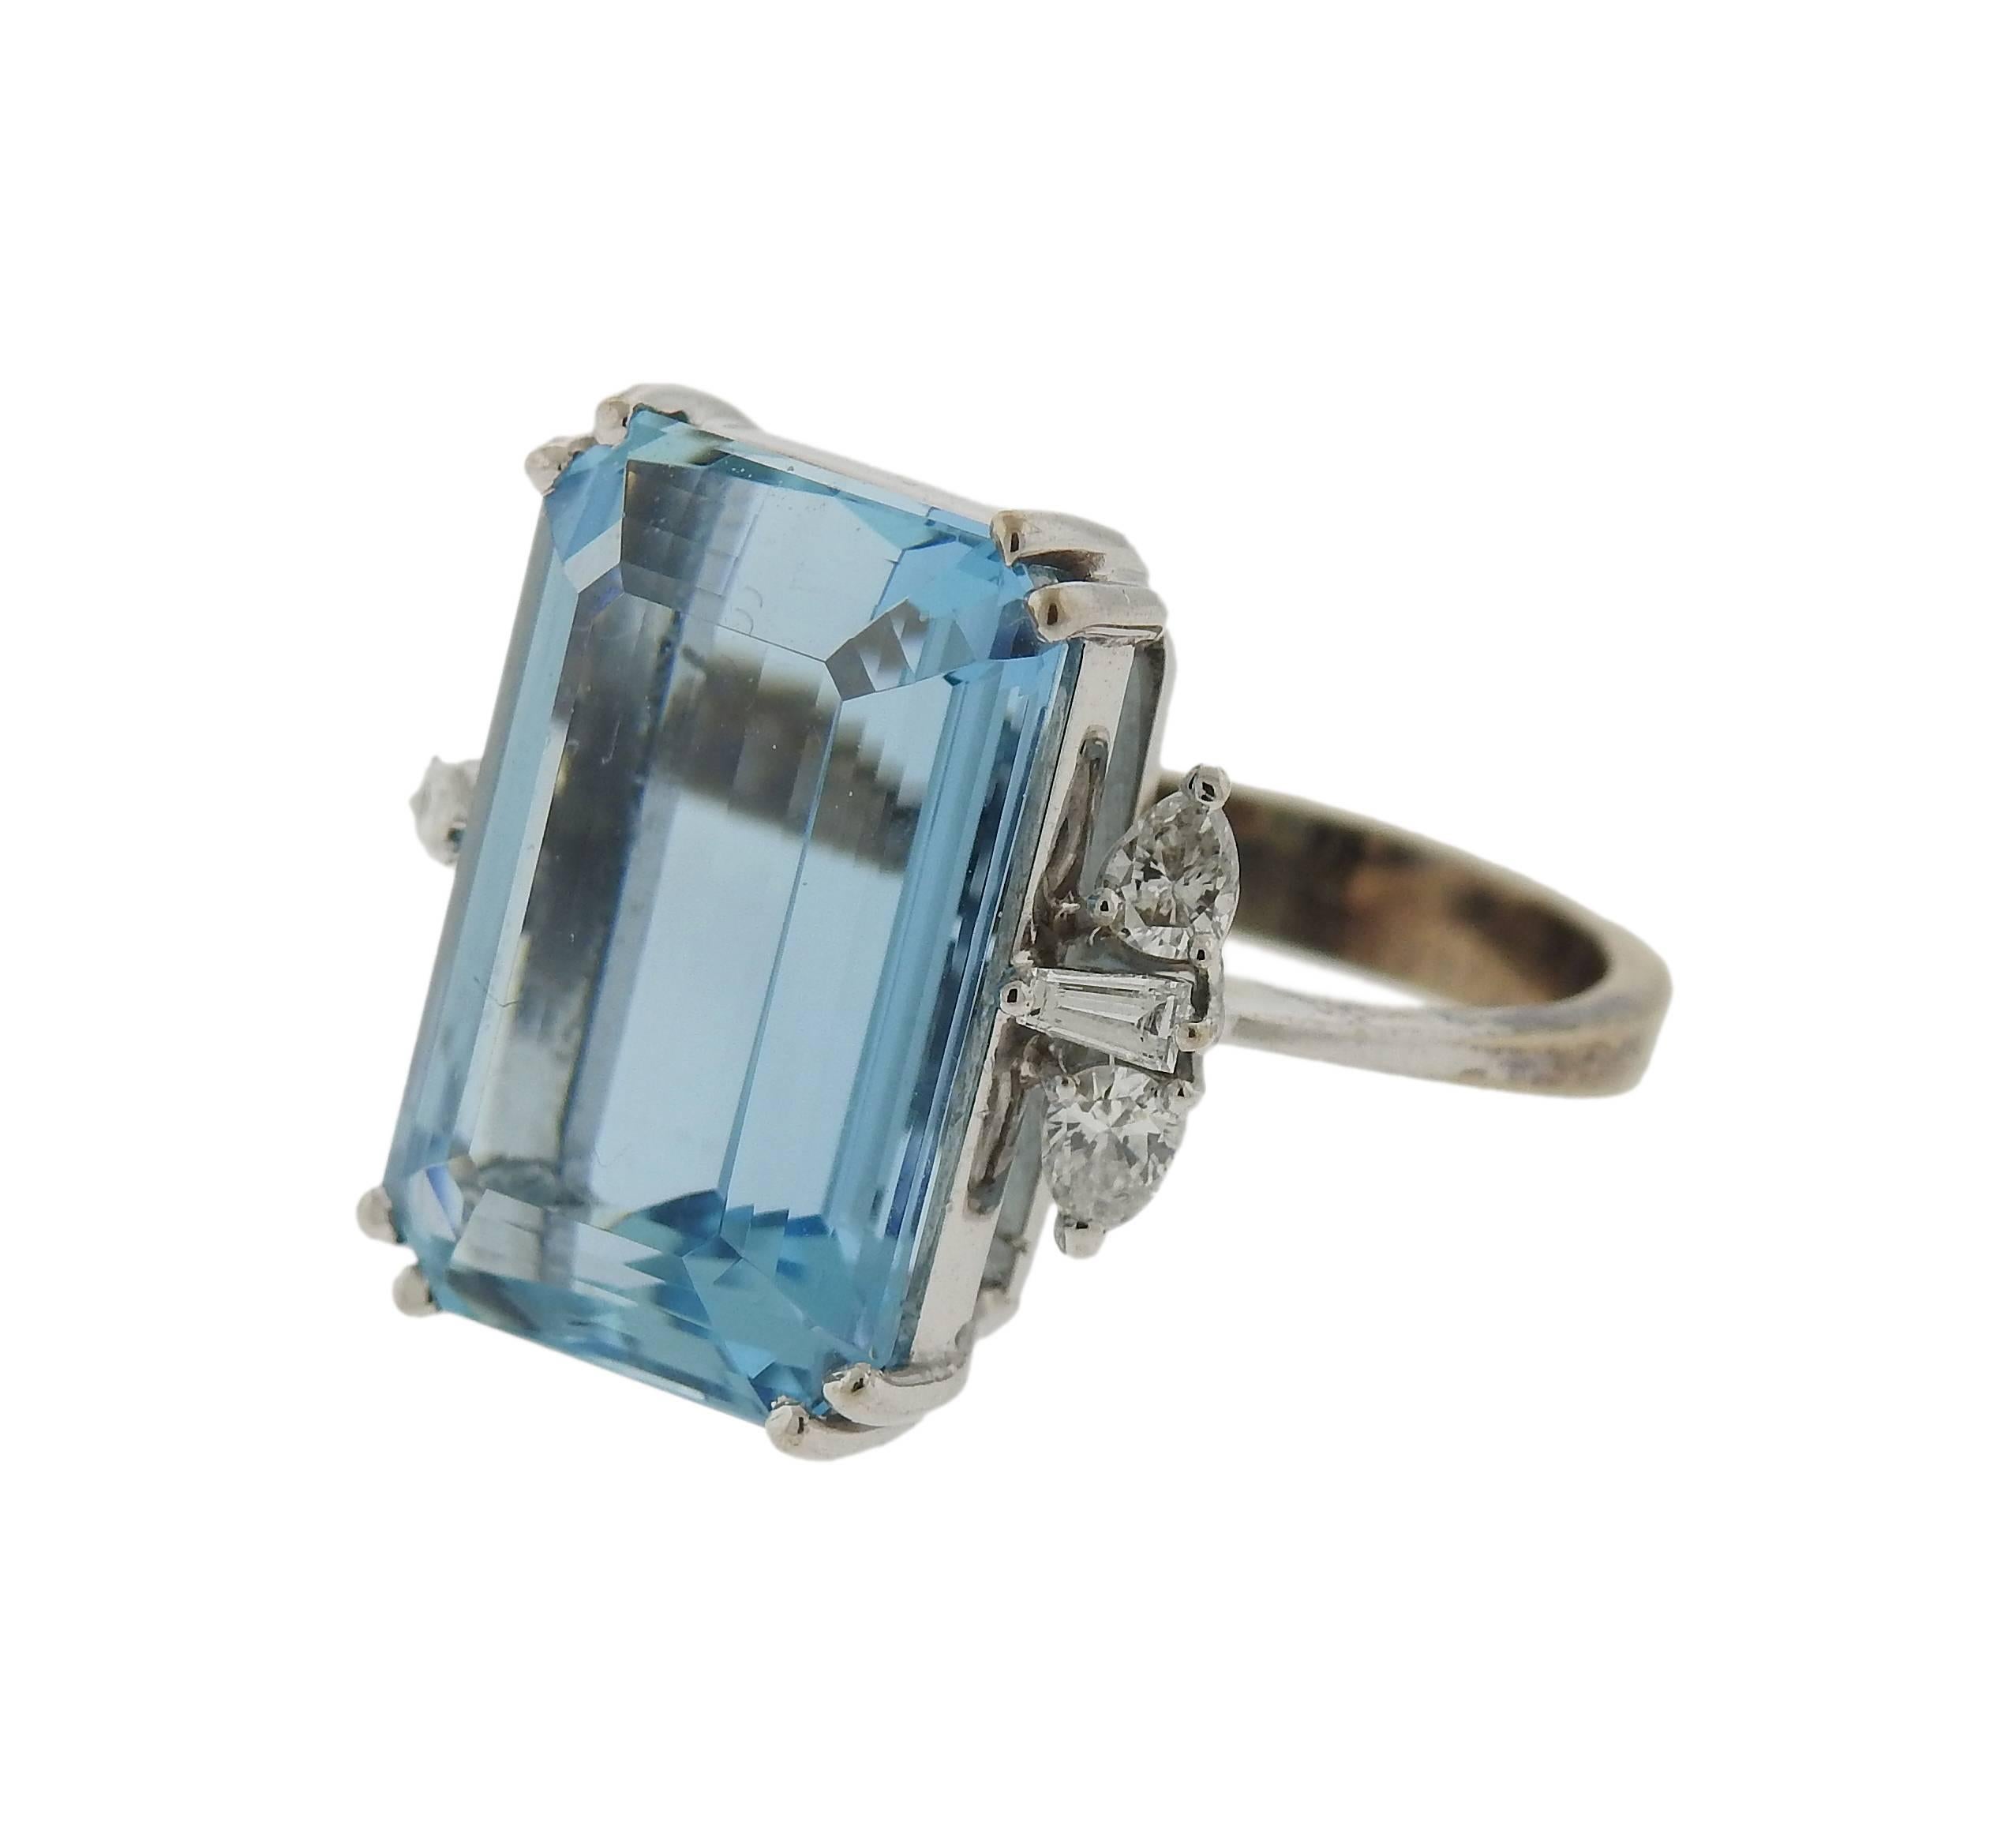 An 18k white gold ring, crafted by H. Stern, featuring approximately 14ct aquamarine, surrounded with 0.58ctw in diamonds. Ring size 7 , weighs 9.8 grams. Marked: S mark, 58, 750